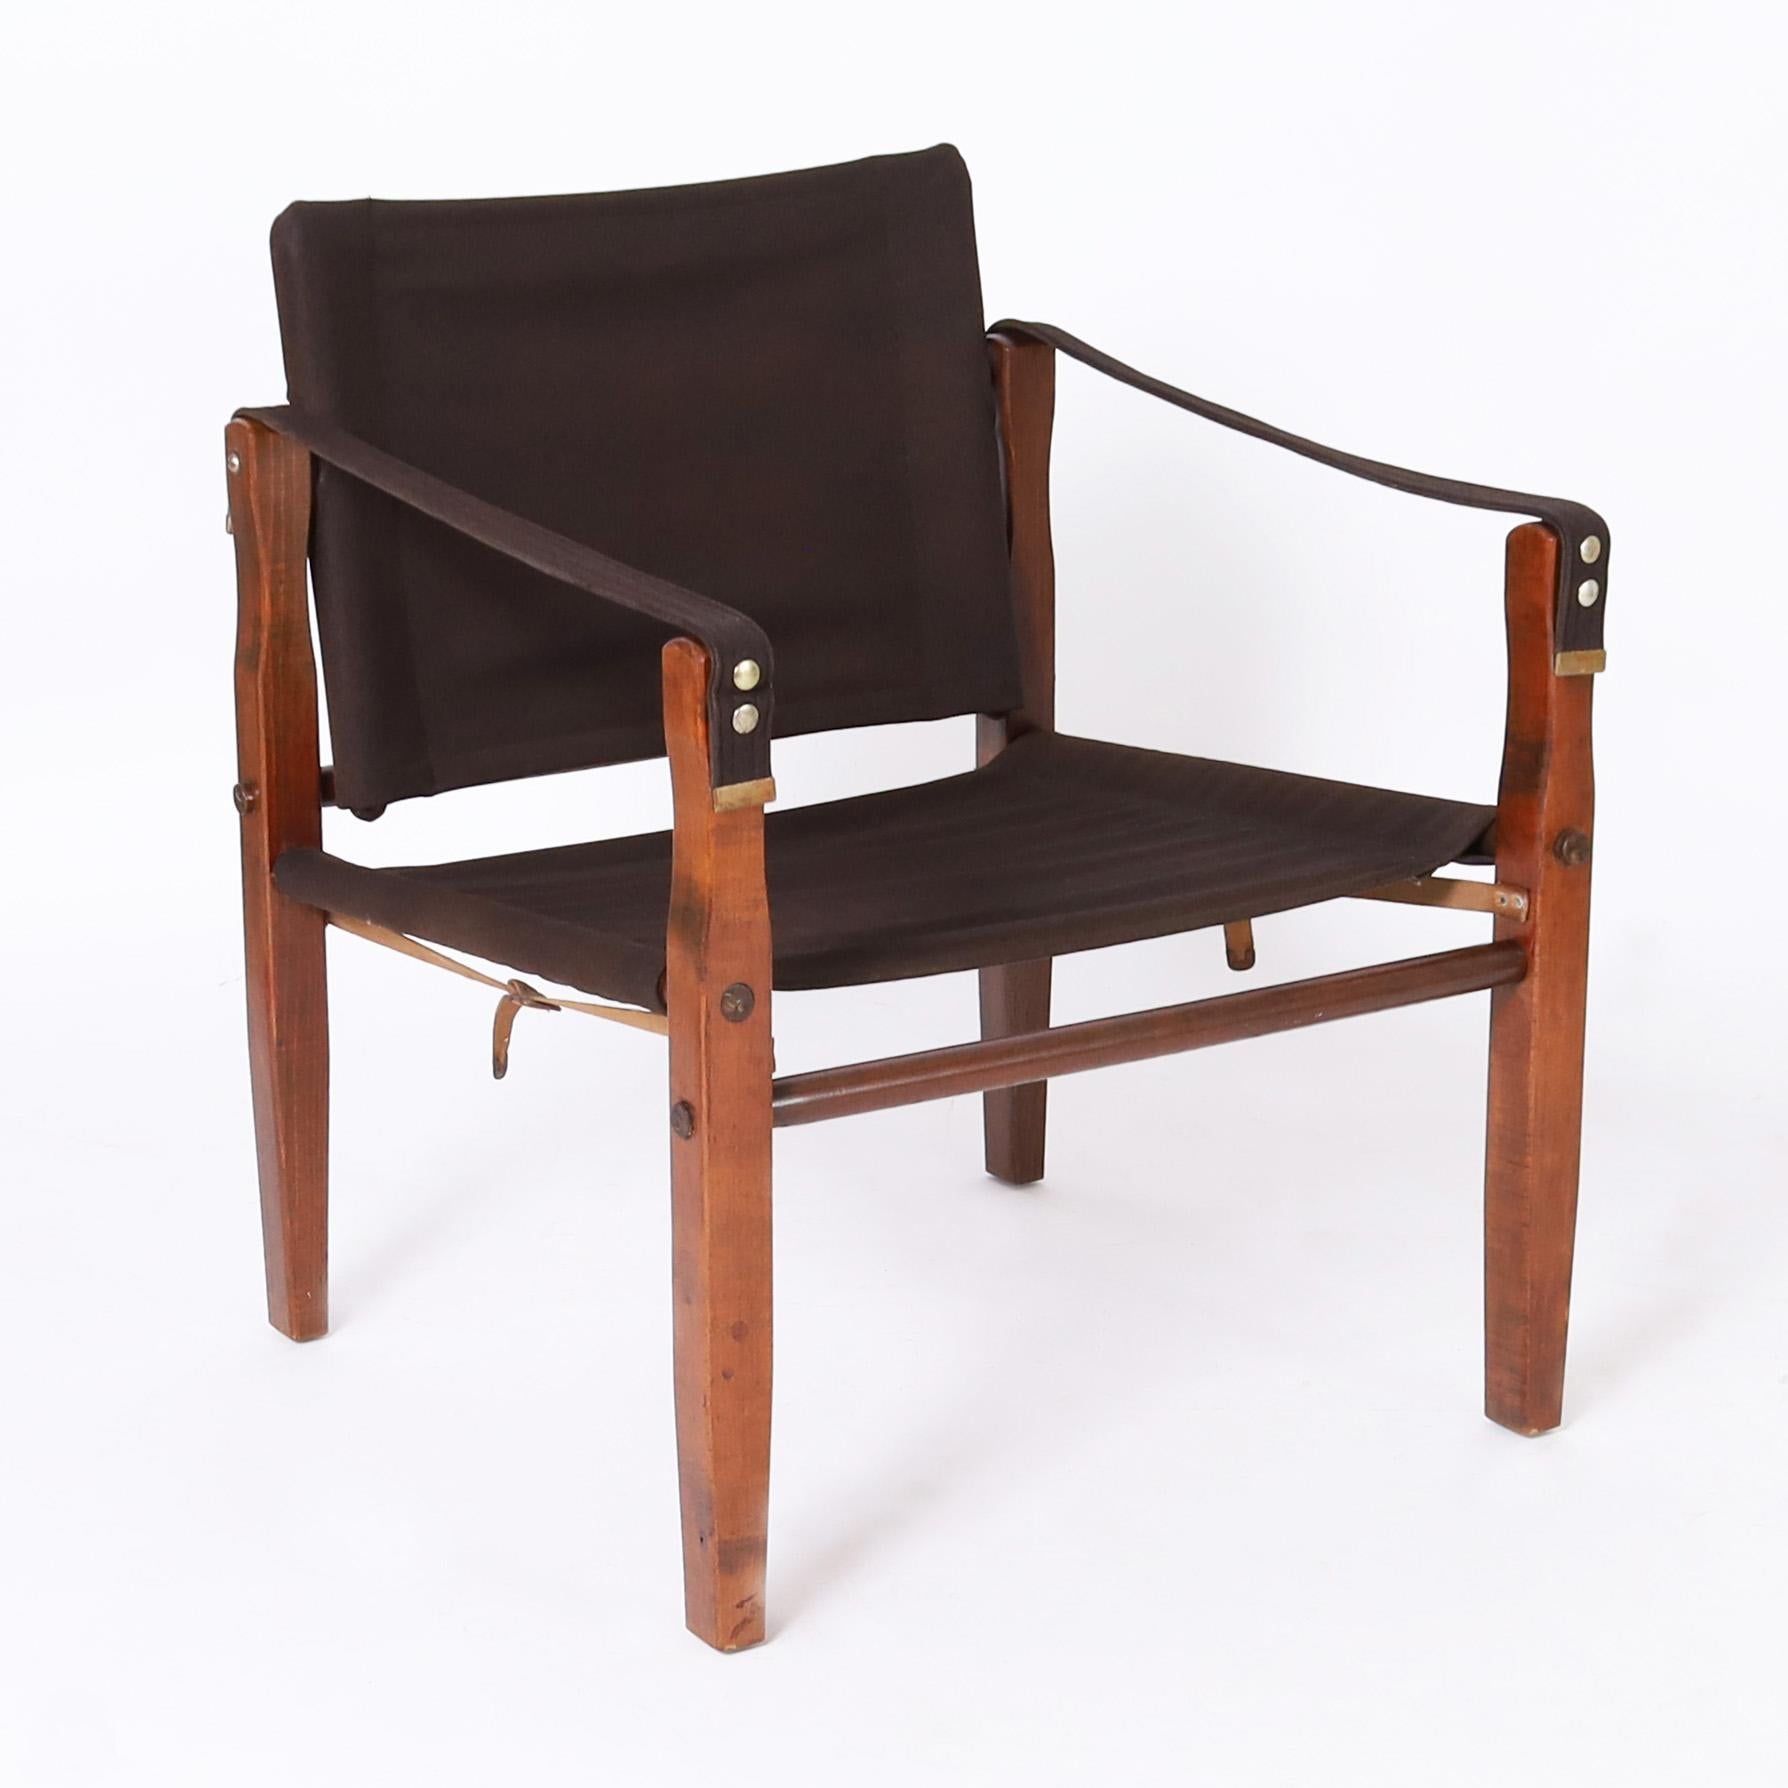 Dashing set of four vintage British Colonial chairs crafted in mahogany stained maple with a pegged construction in a safari style having classic sling upholstered arms, seats and backs in a durable cotton fabric.